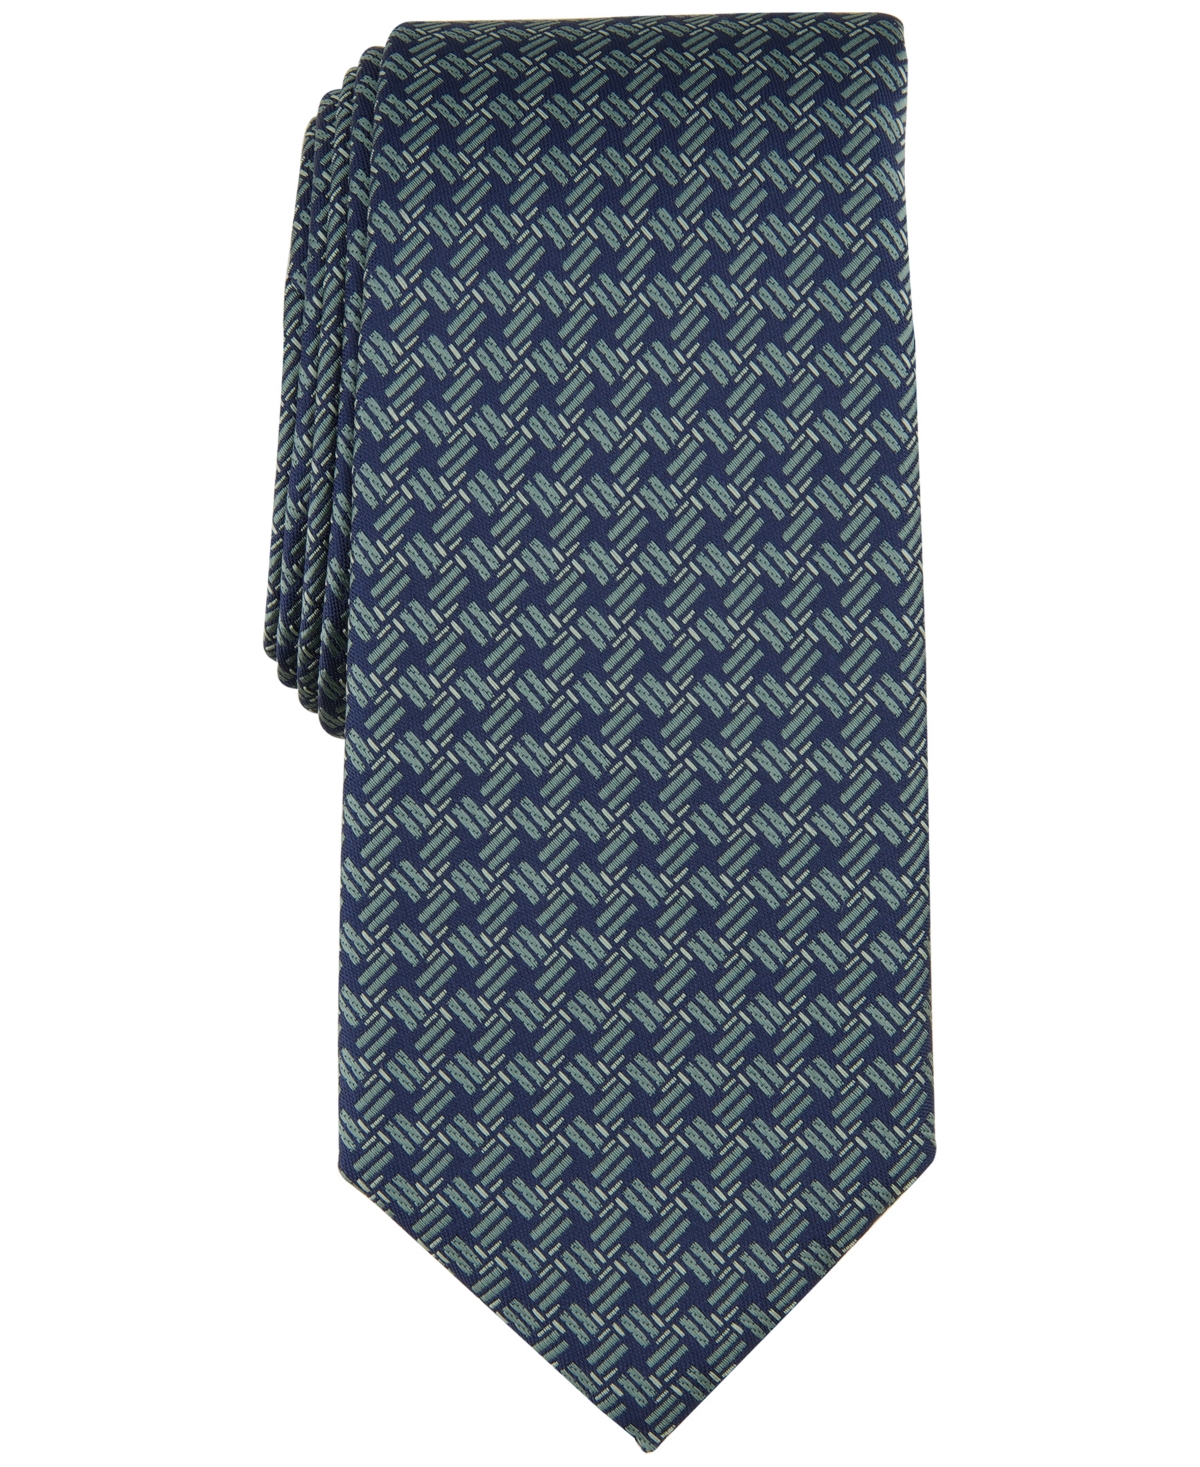 Men's Tolbert Patterned Tie, Created for Macy's - Silver